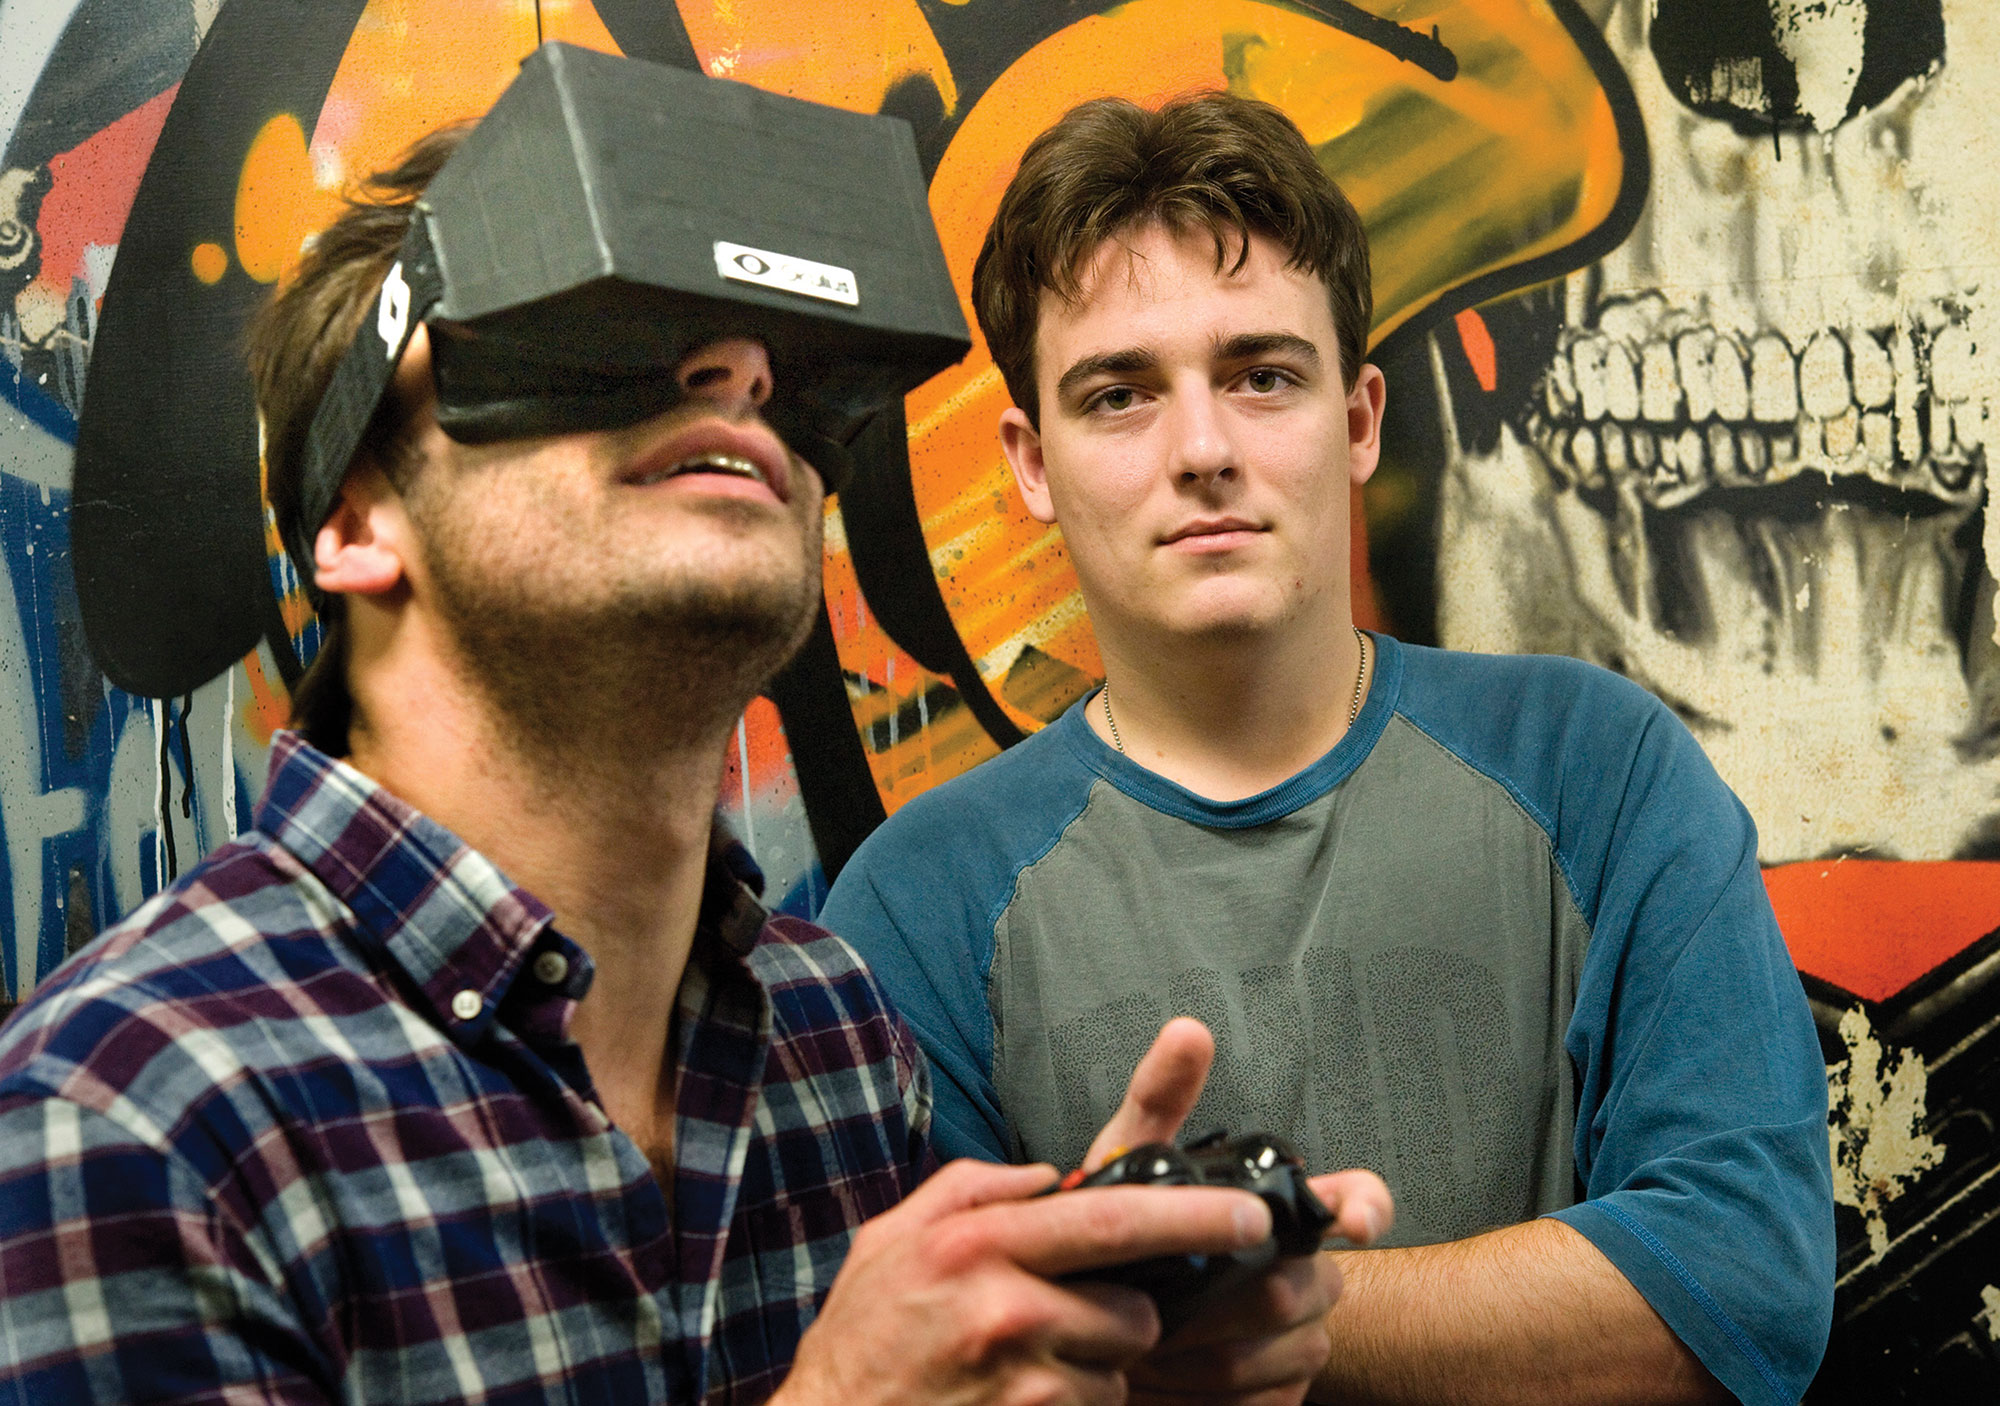 A photo shows Palmer Luckey standing with a man wearing VR headset.